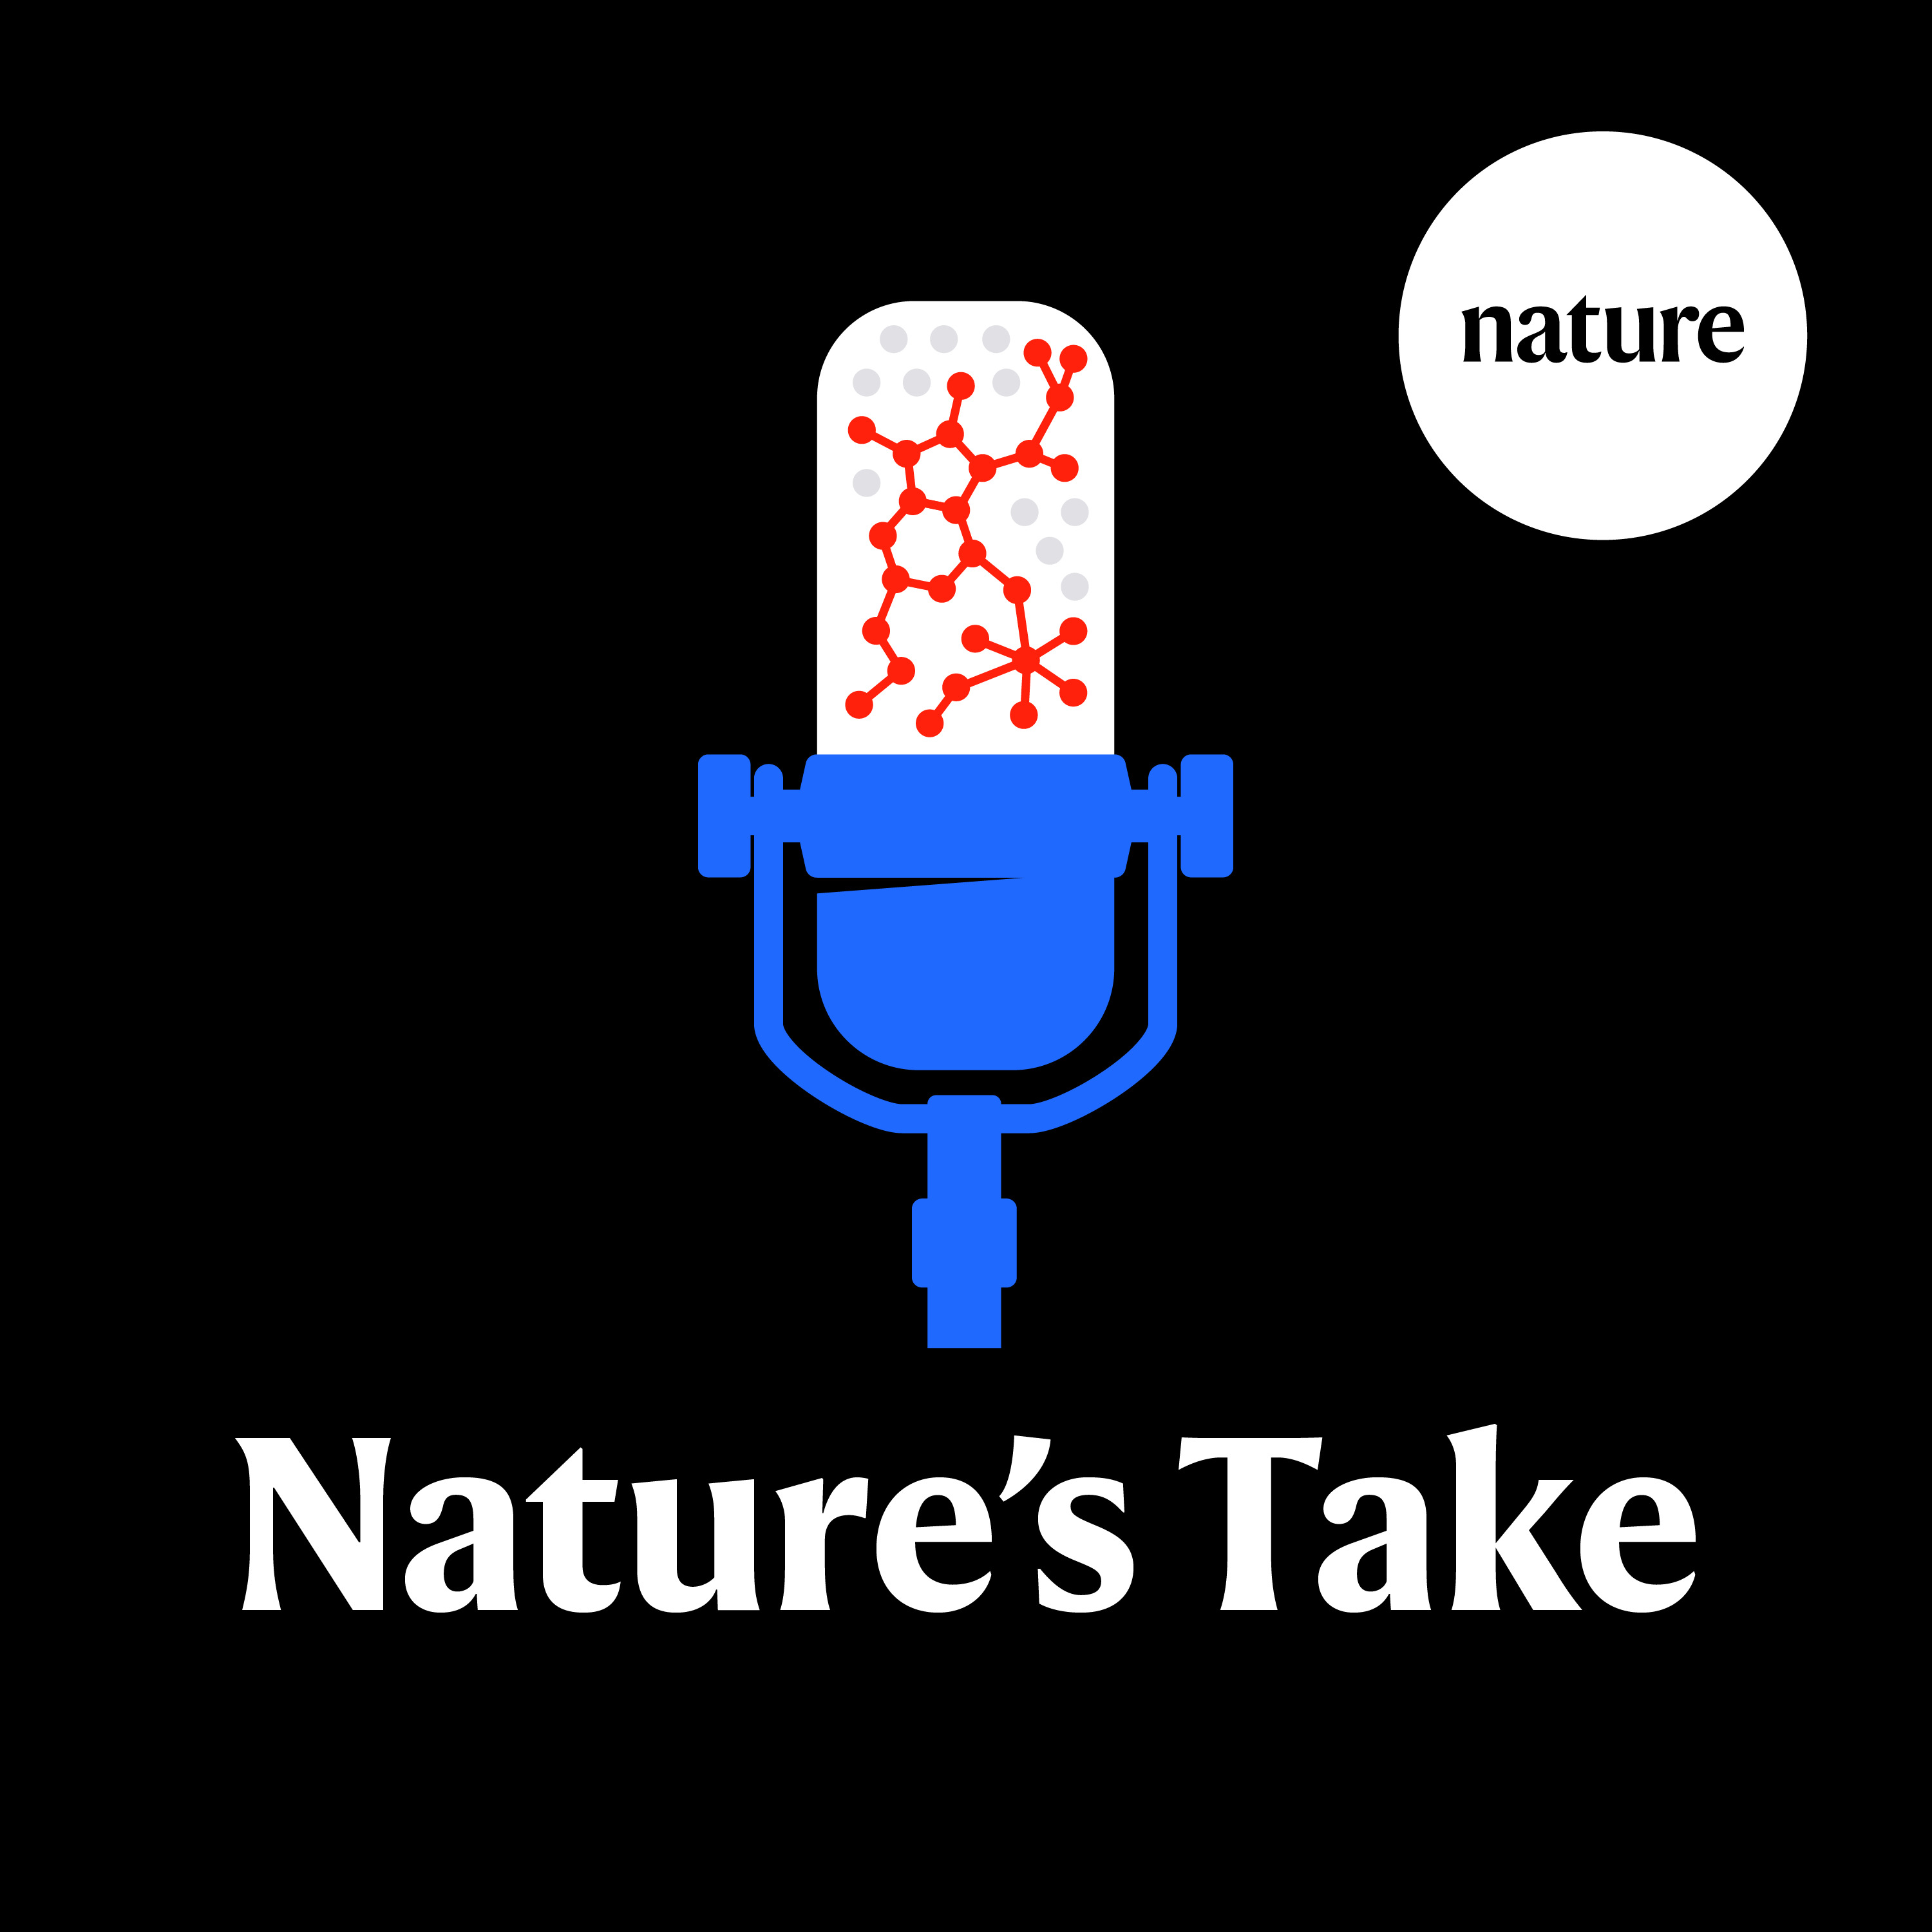 Nature’s Take: Can Registered Reports help tackle publication bias?